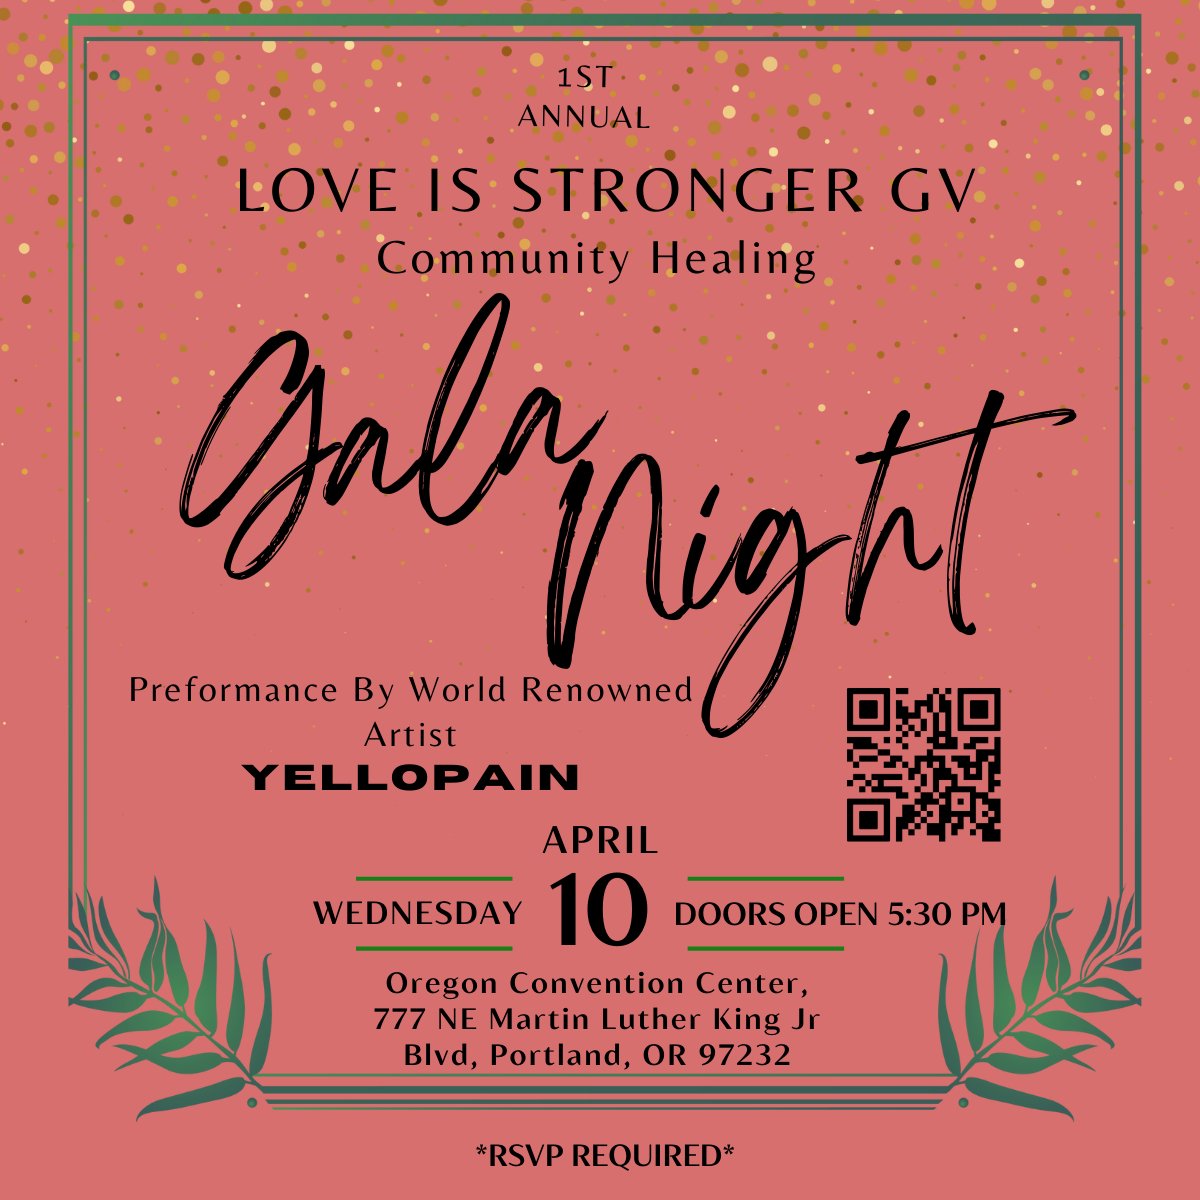 Love is Stronger is doing powerful community violence intervention work in the Portland Metro area. Their work is having a positive impact on reducing cycles of violence in our communities. If you're able to, support their work and attend their gala in April.